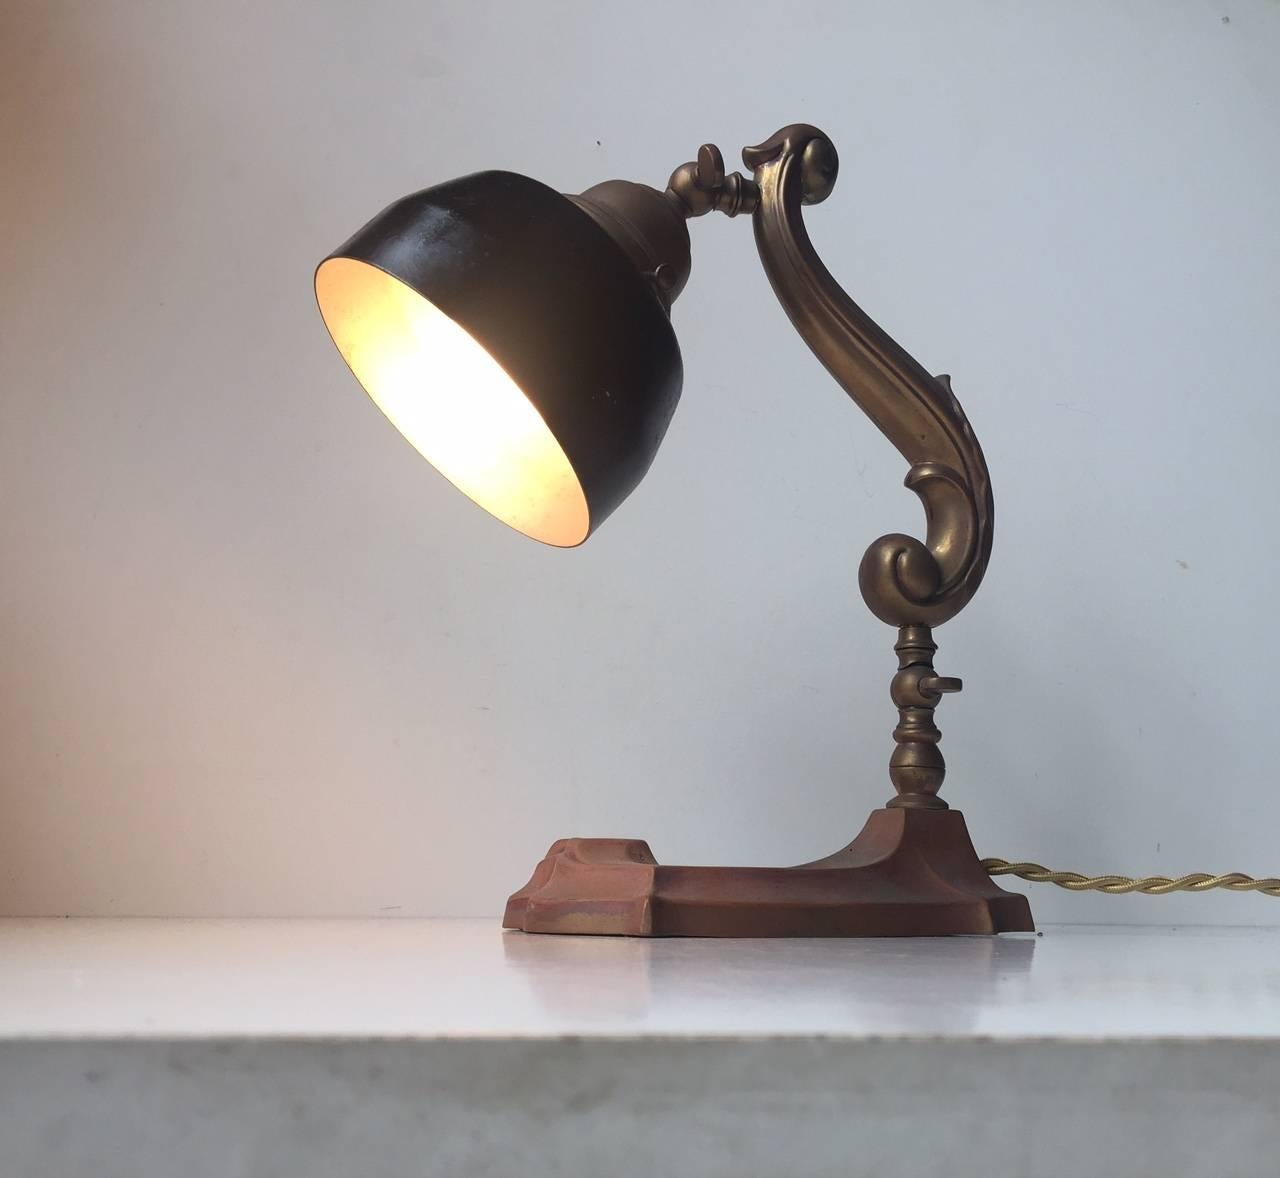 Danish 1920s Art Nouveau Patinated Copper and Brass Table Lamp In Good Condition For Sale In Esbjerg, DK